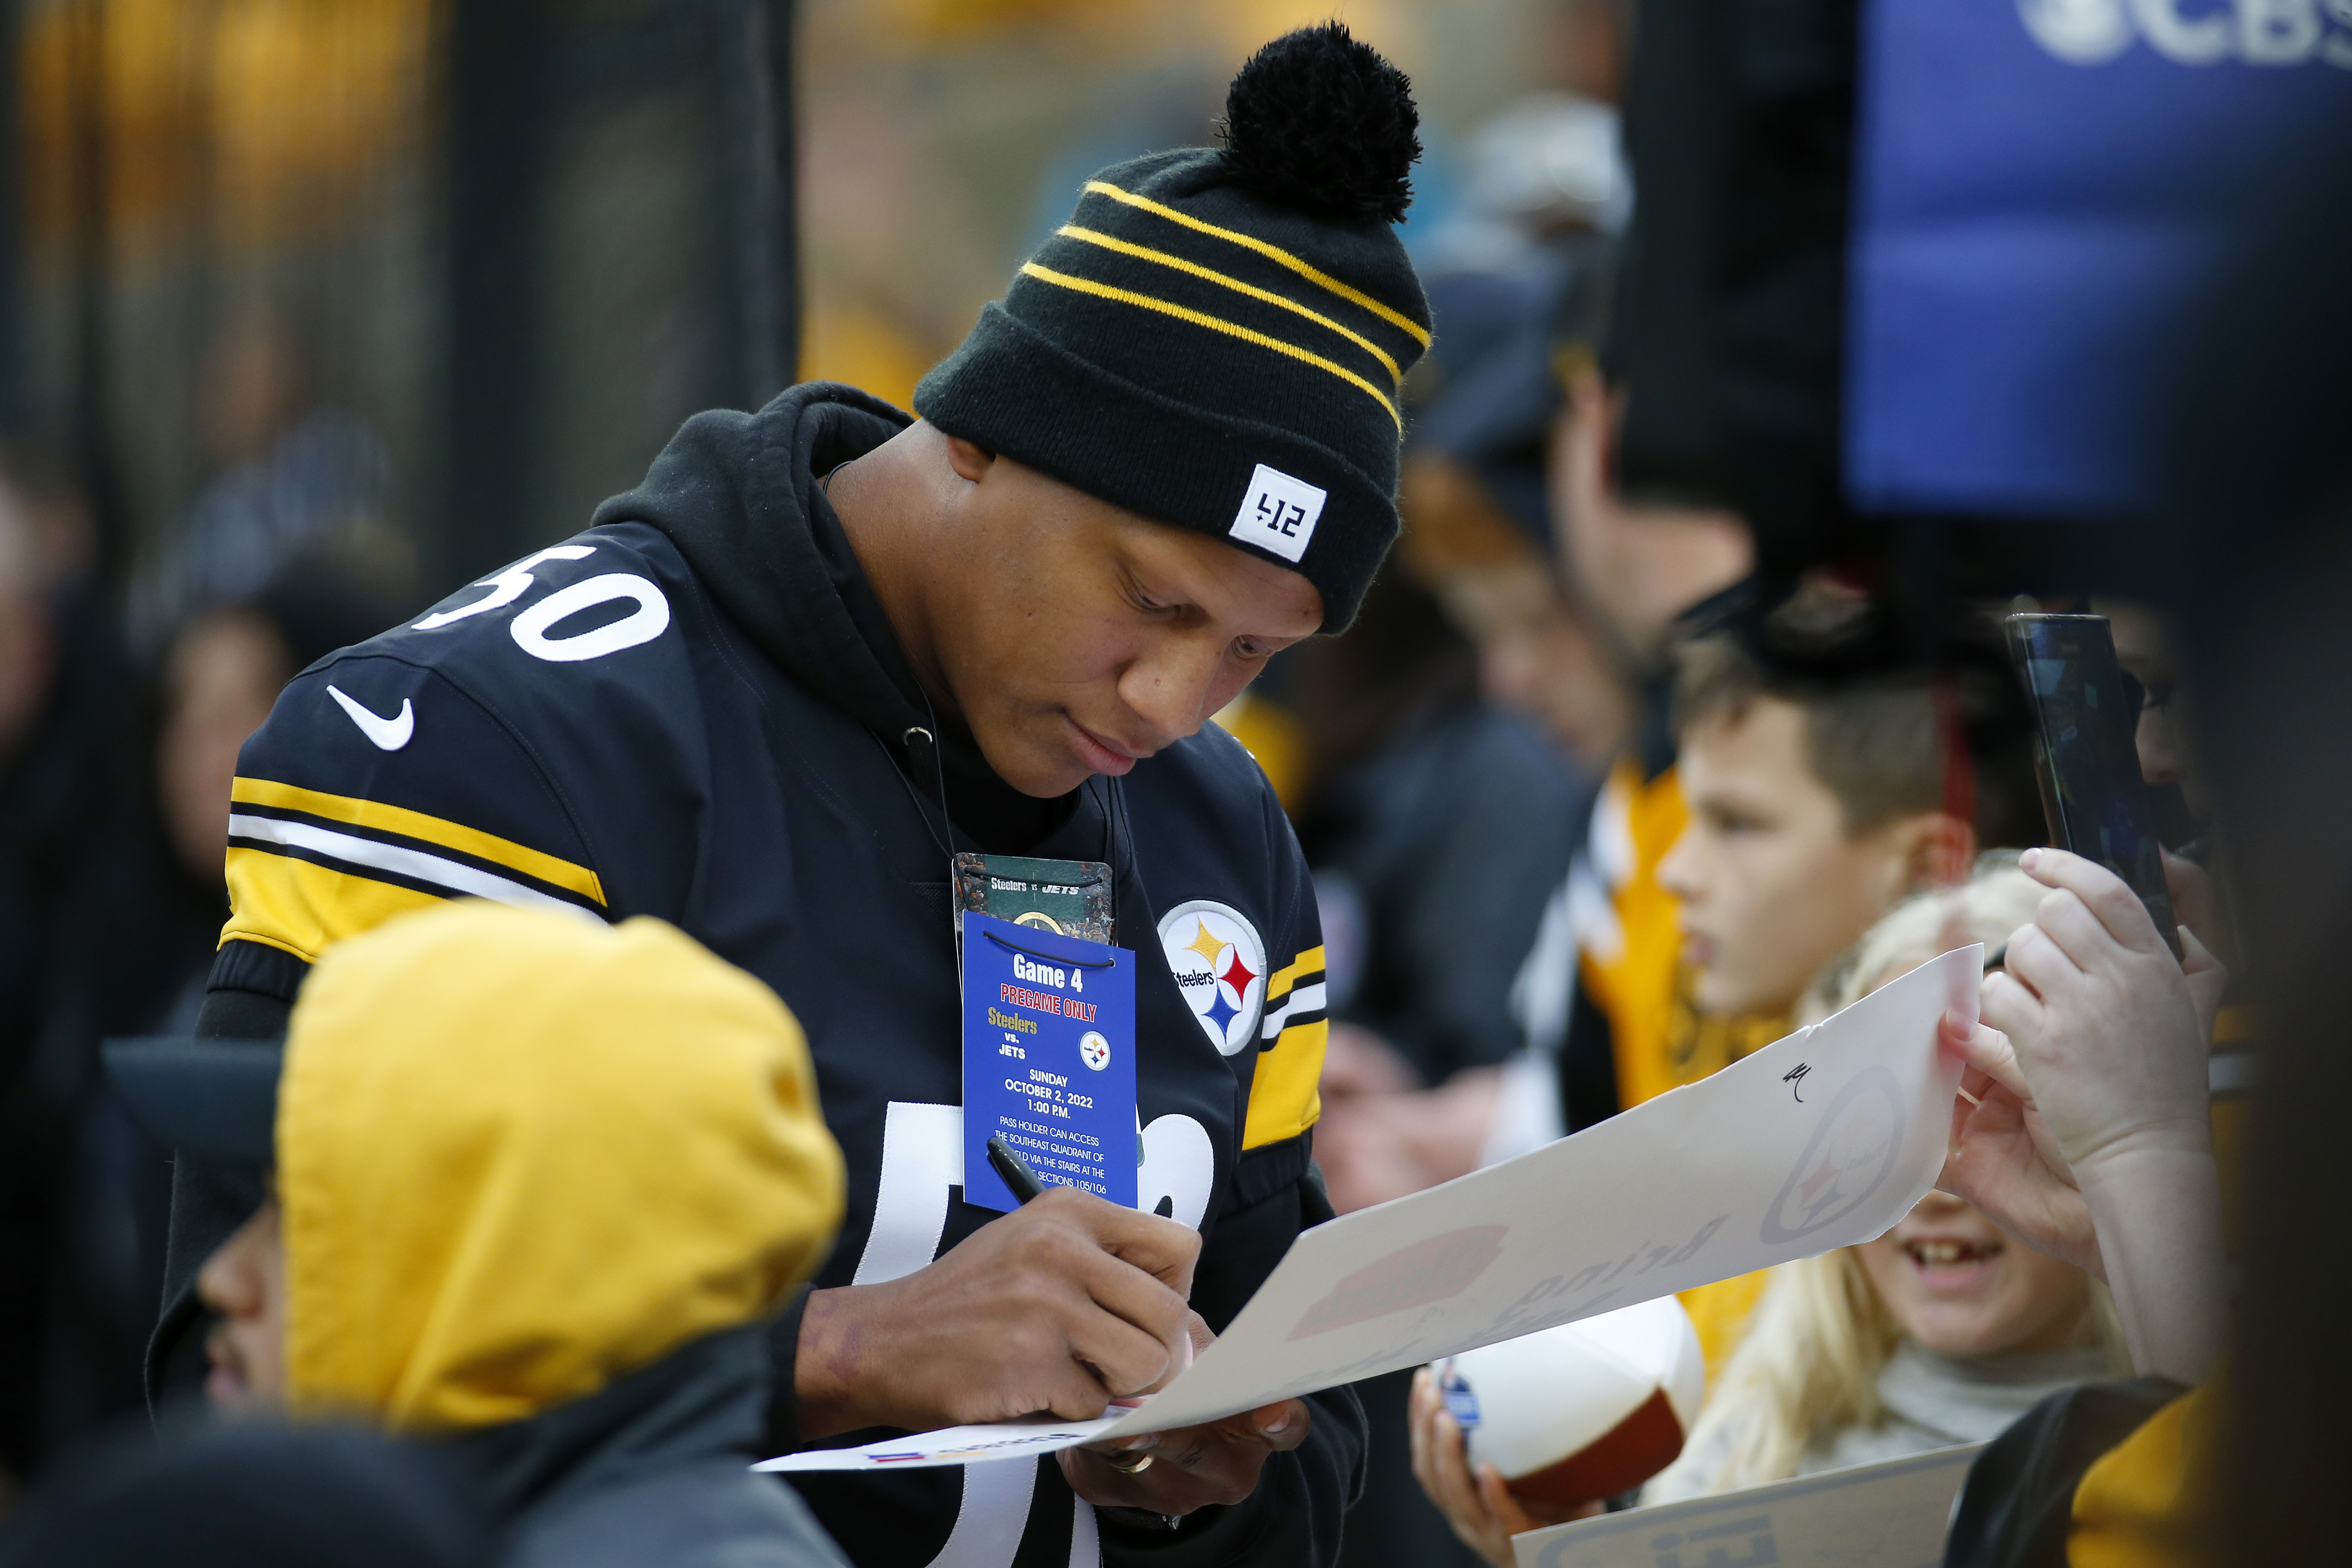 Former Pittsburgh Steelers player Ryan Shazier signs autographs for fans before the game between the New York Jets and the Pittsburgh Steelers at Acrisure Stadium on October 02, 2022 in Pittsburgh, Pennsylvania.